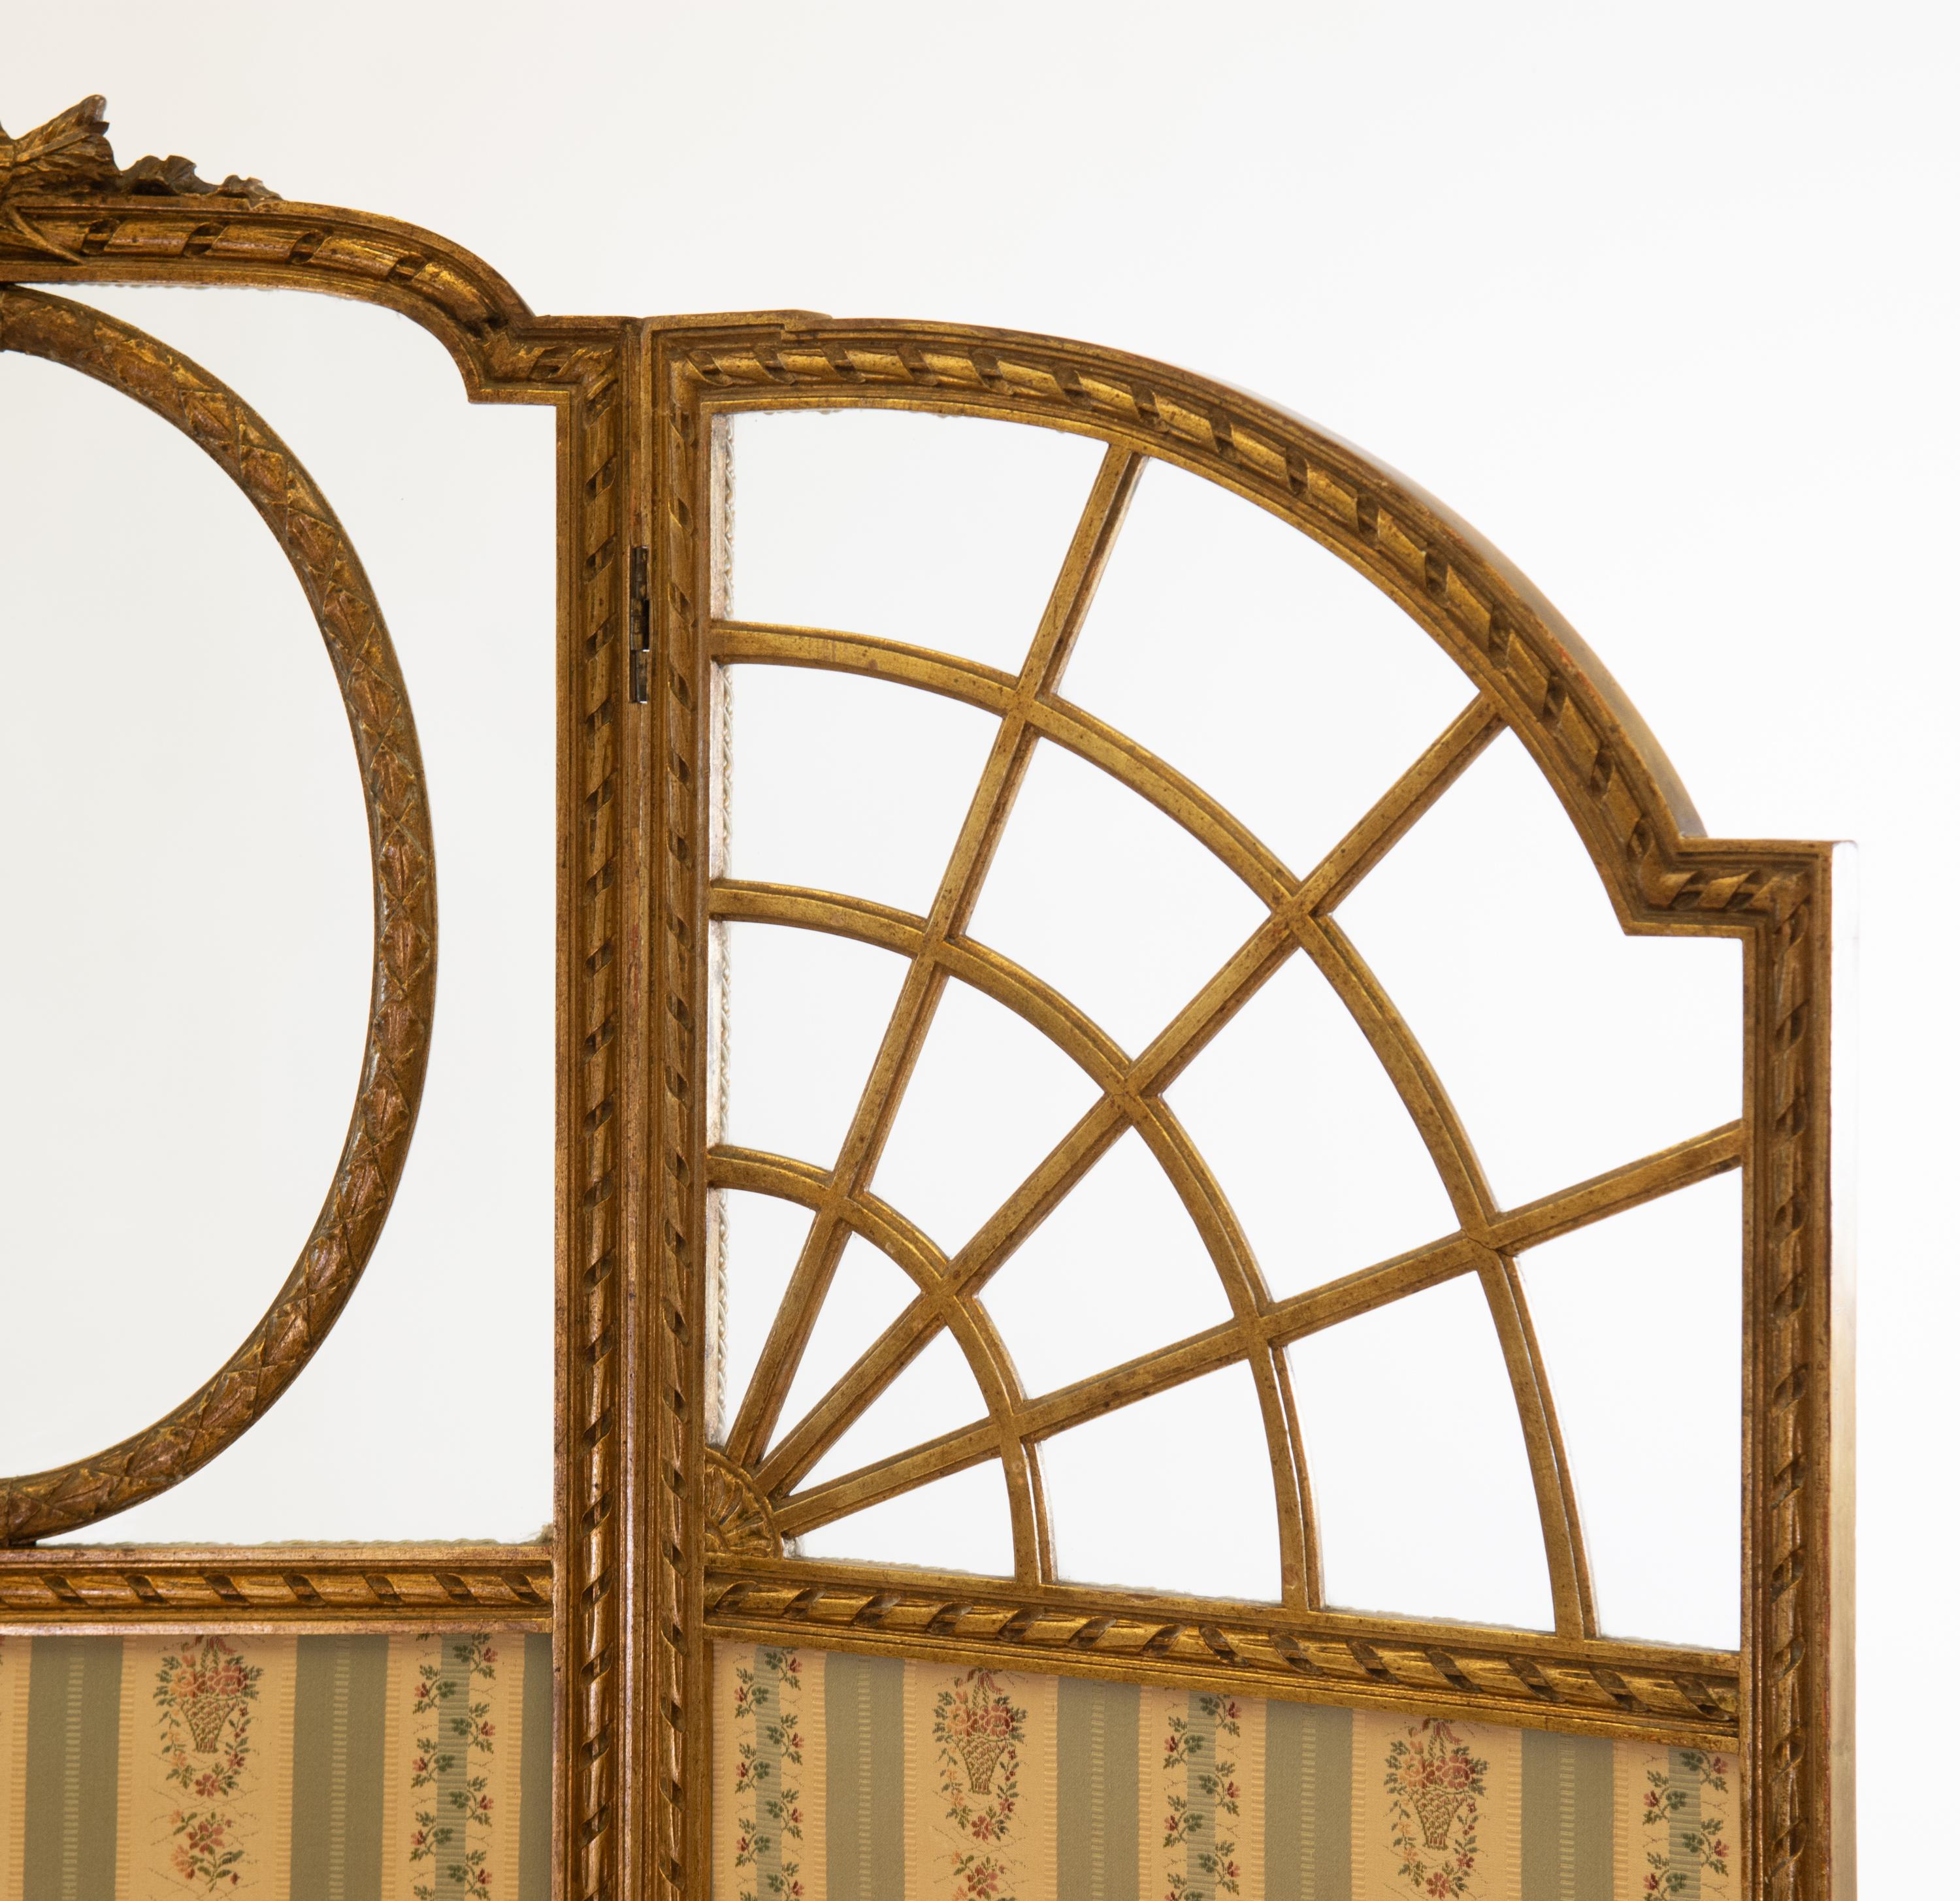 Early 20th Century Antique English Edwardian Gilt Wood Folding Screen Room Divider For Sale